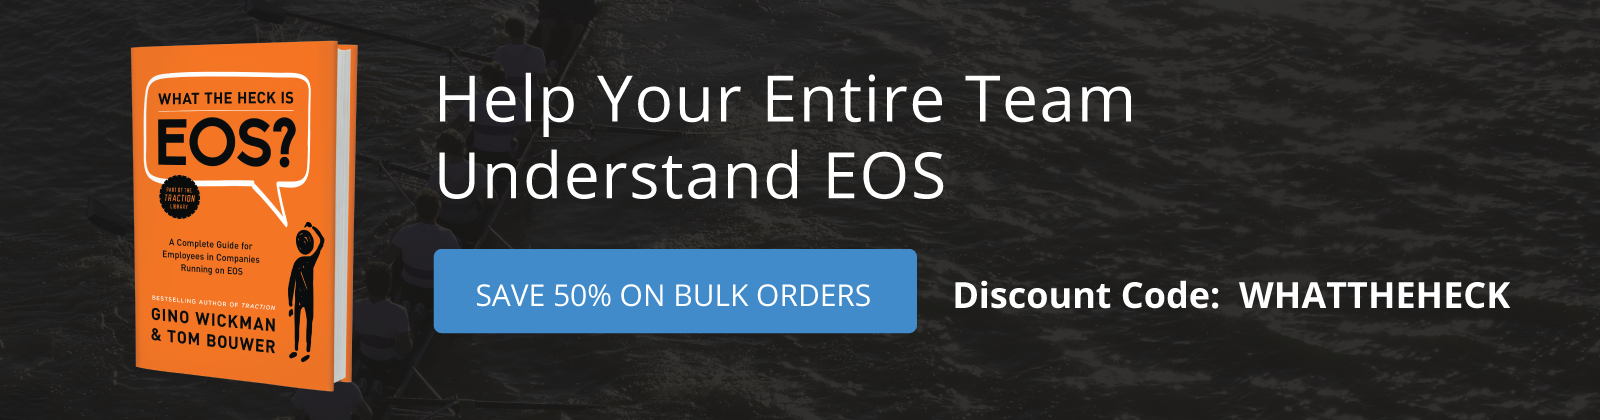 Bulk order What the Heck is EOS?